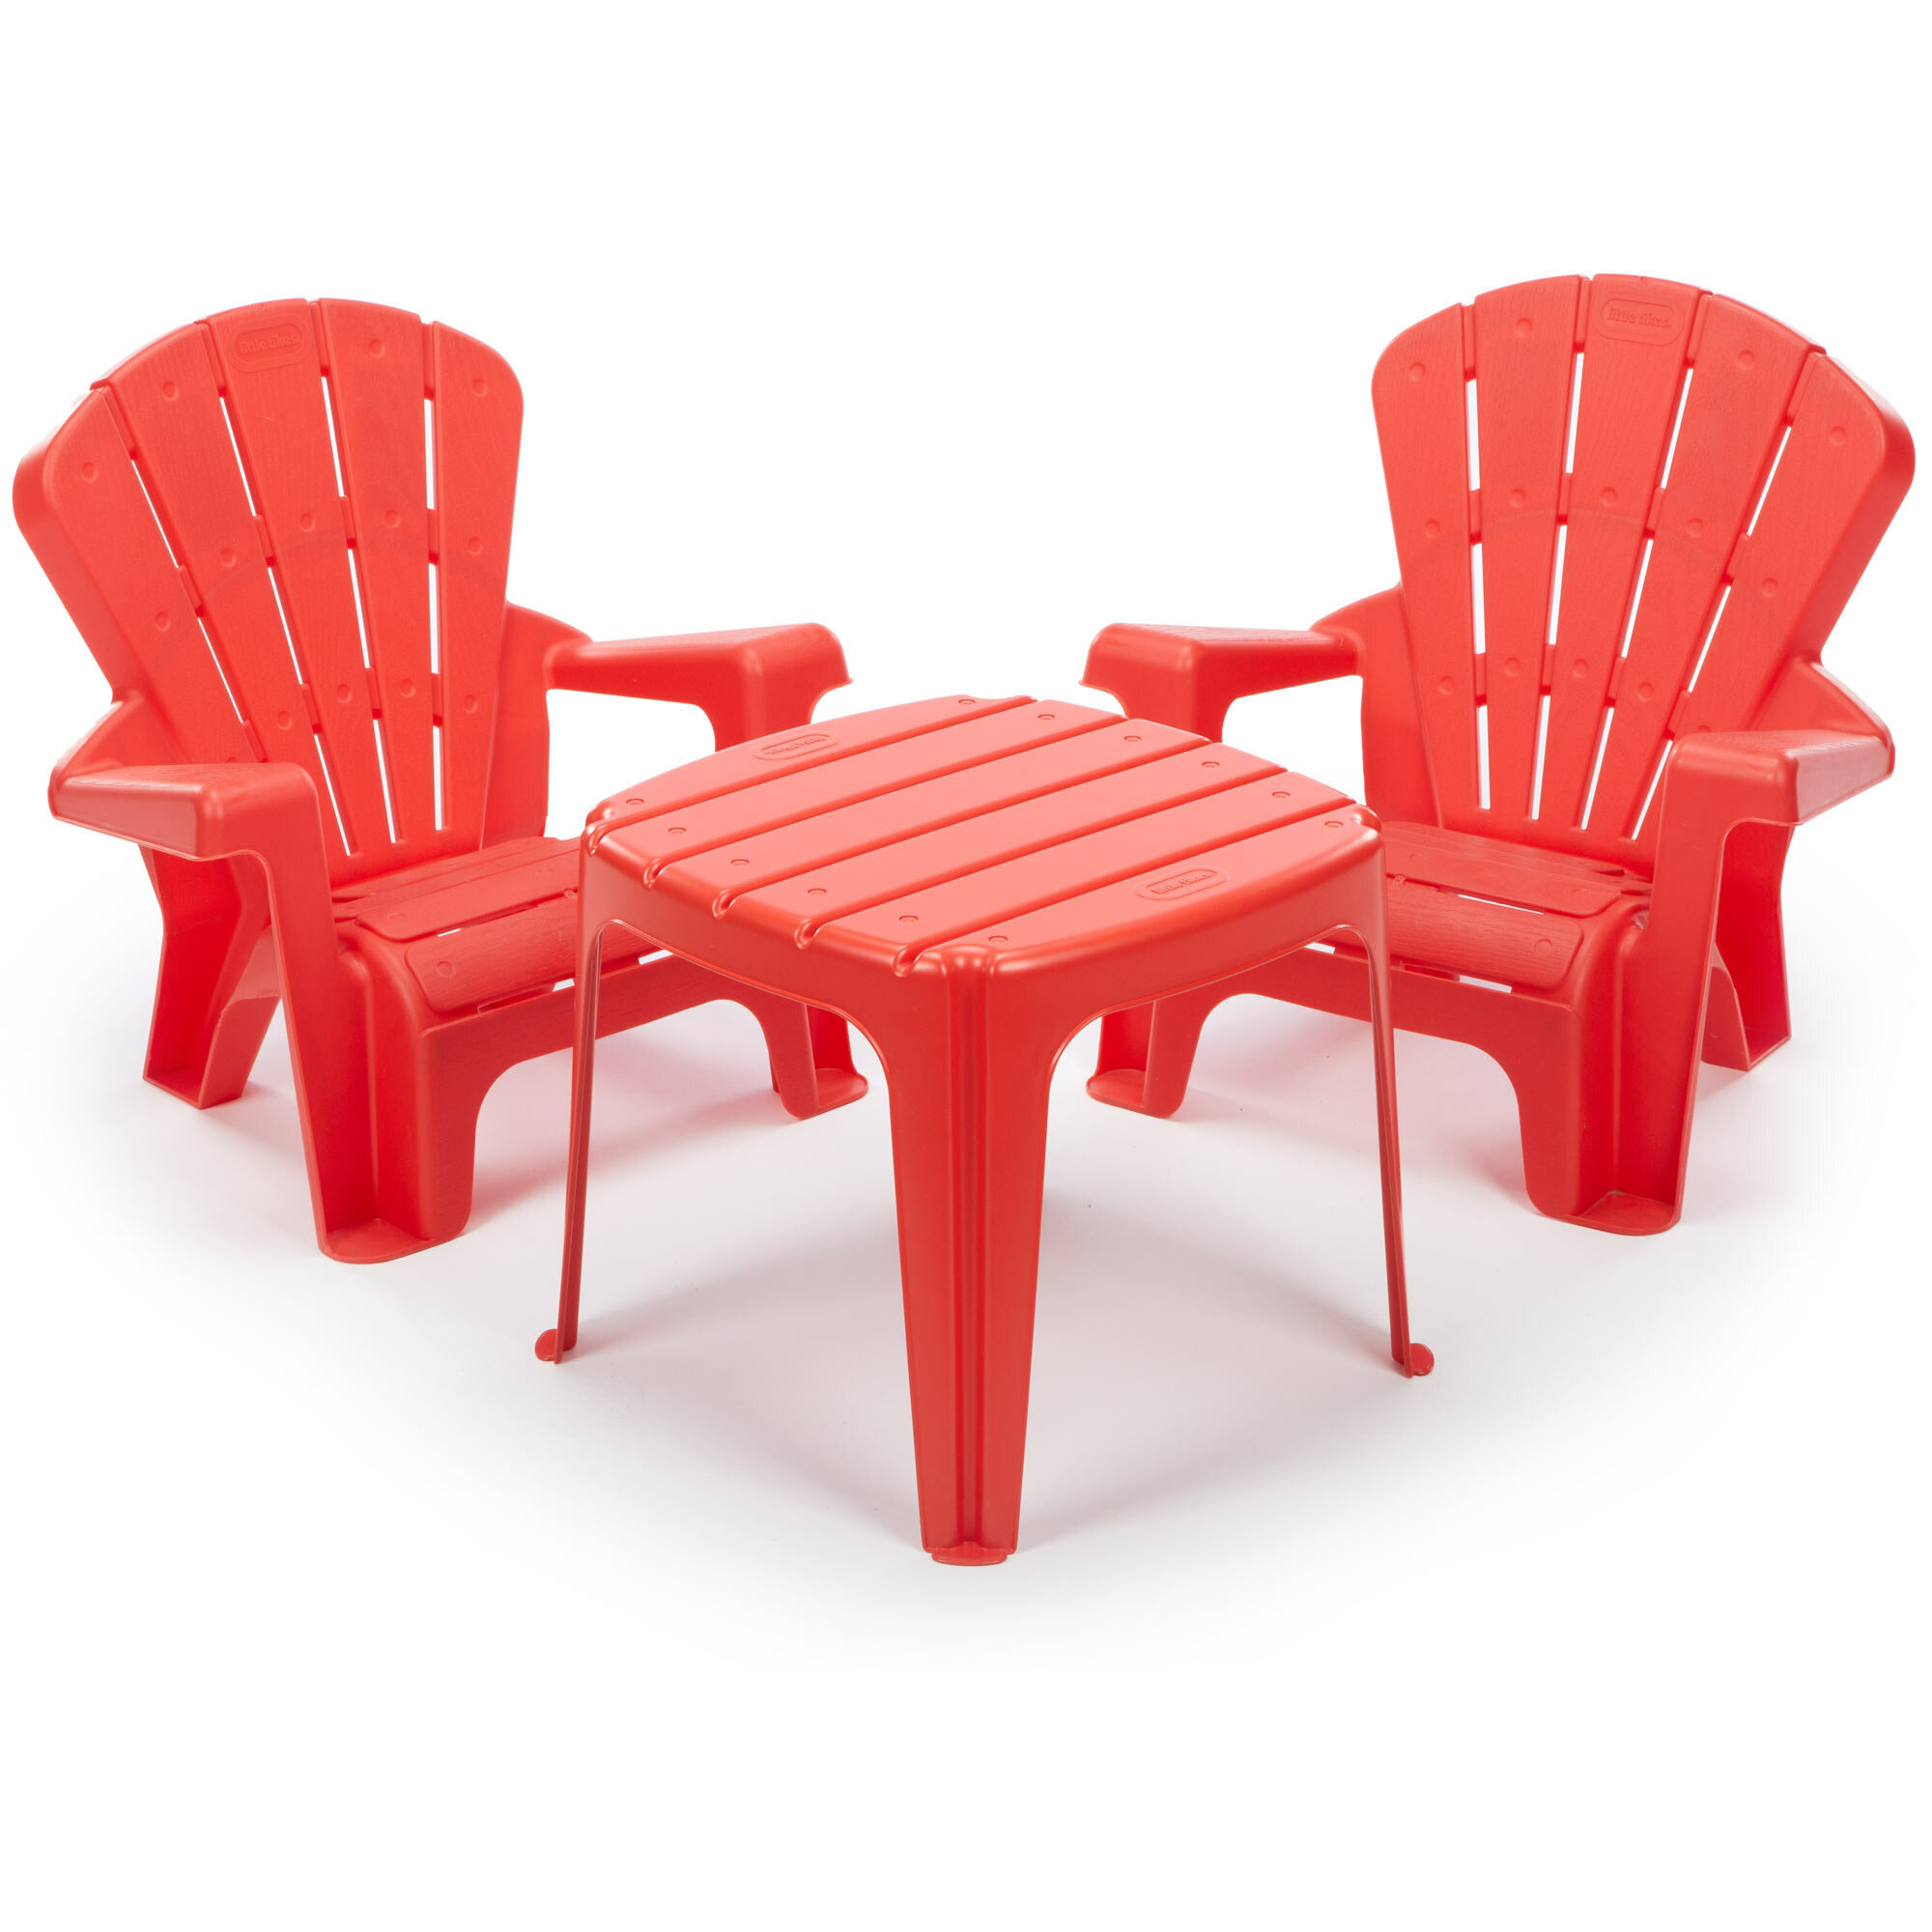 Little Tikes Garden Kids 3 Piece Table And Chair Set Reviews